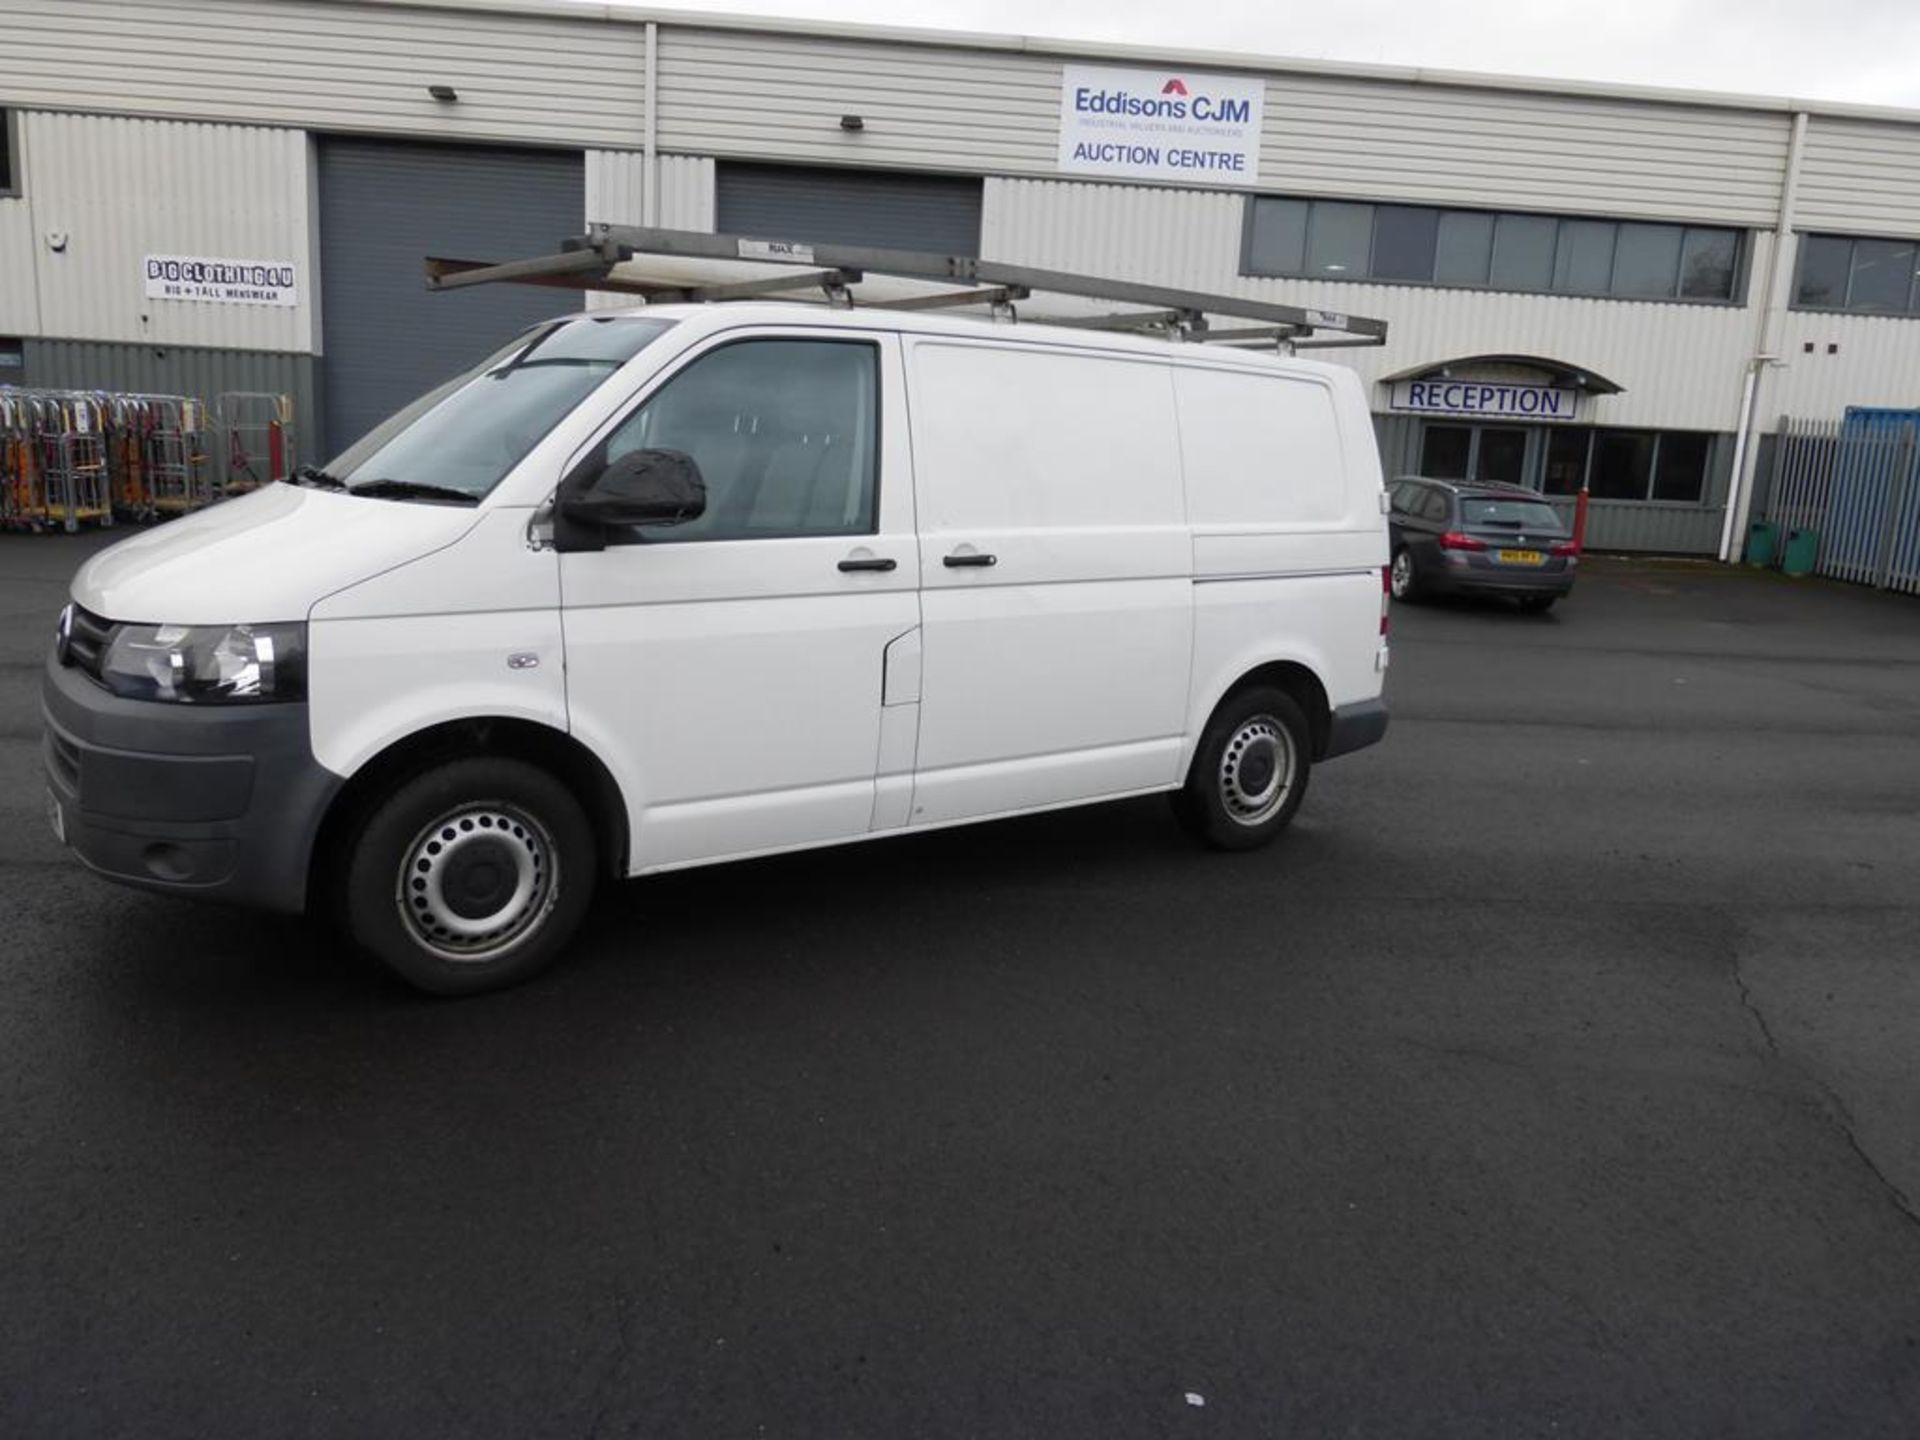 * 2011 Volkswagen Transporter 1968cc Diesel. Revenue Weight 2800Kg, fitted with Roof Rack. - Image 3 of 19